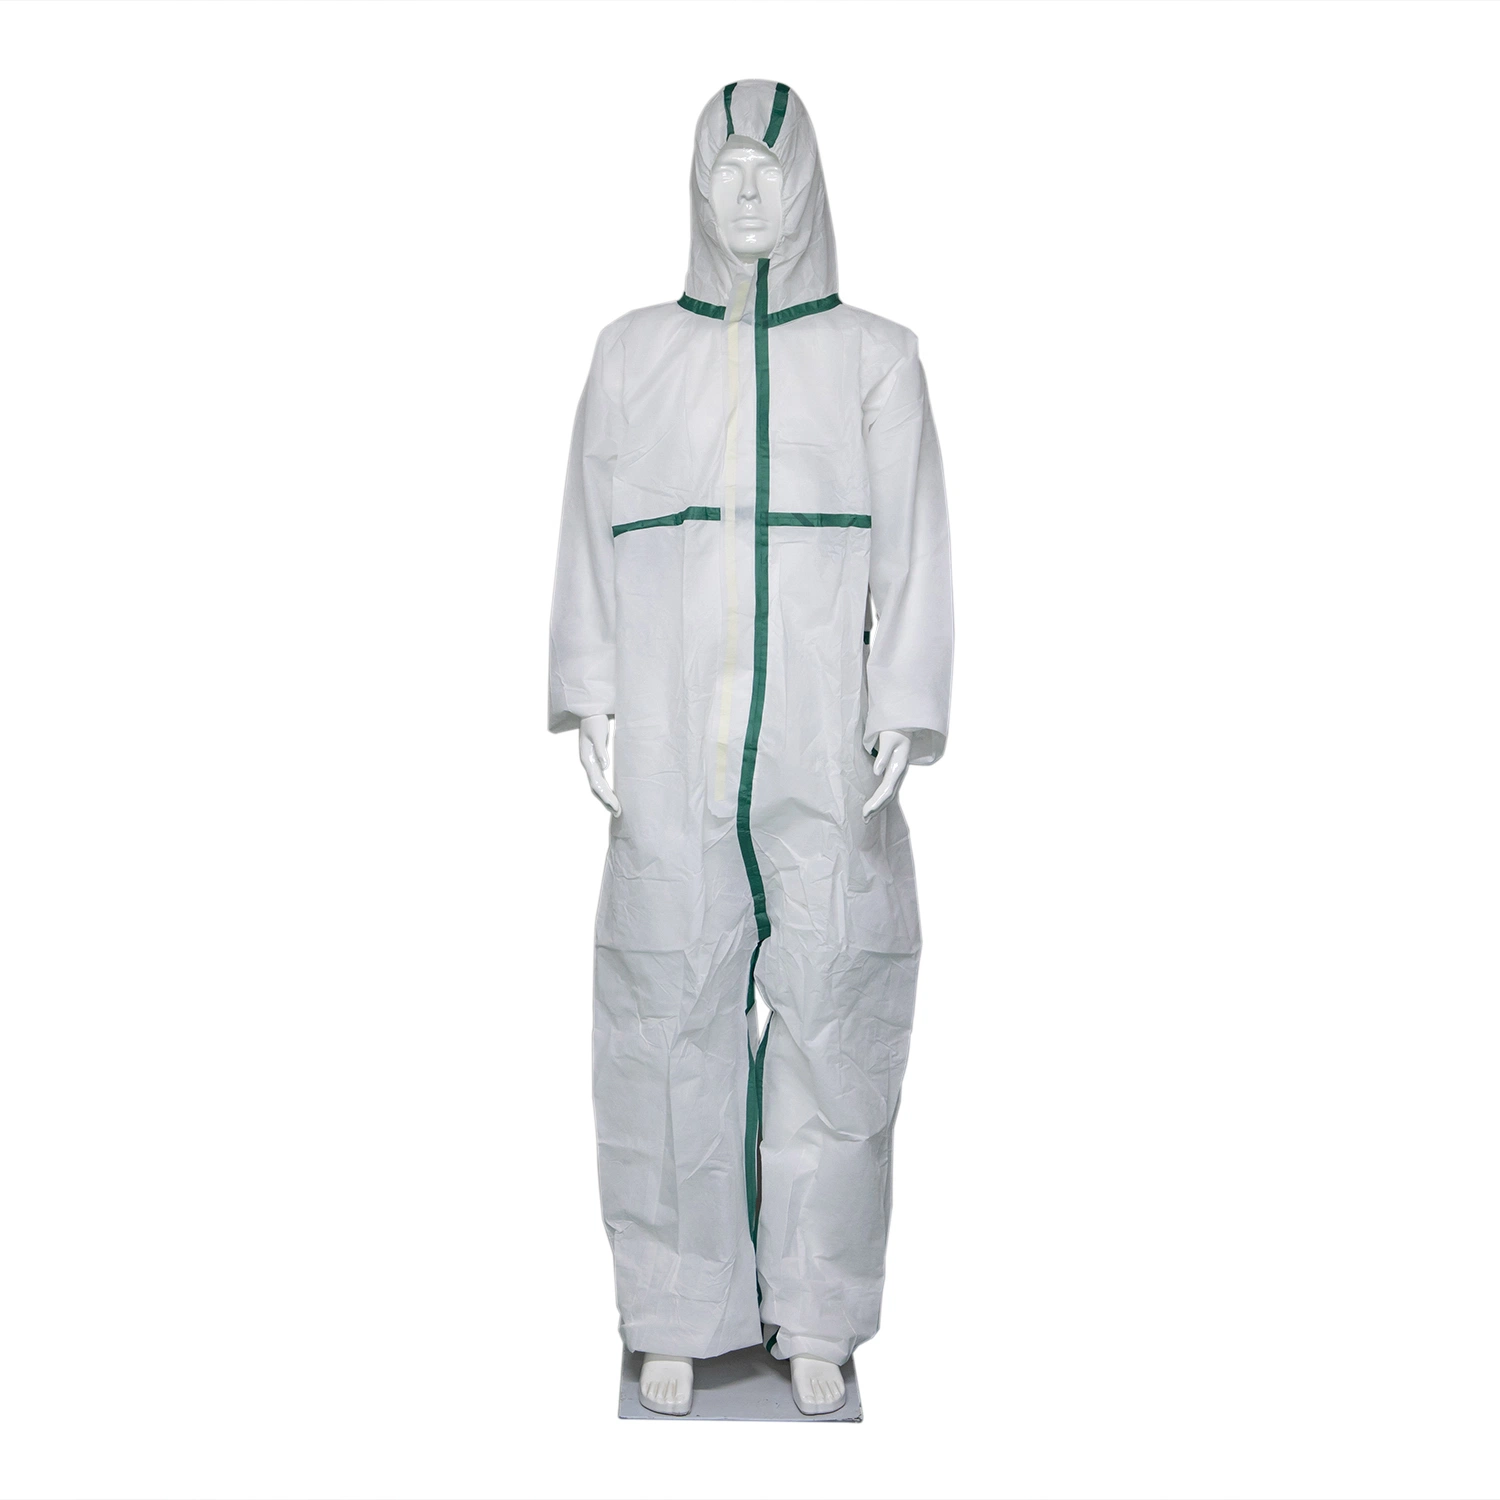 Type 4/5/6 PPE Safety Anti-Static PP PE Hooded Nonwoven Medical Coverall Suit